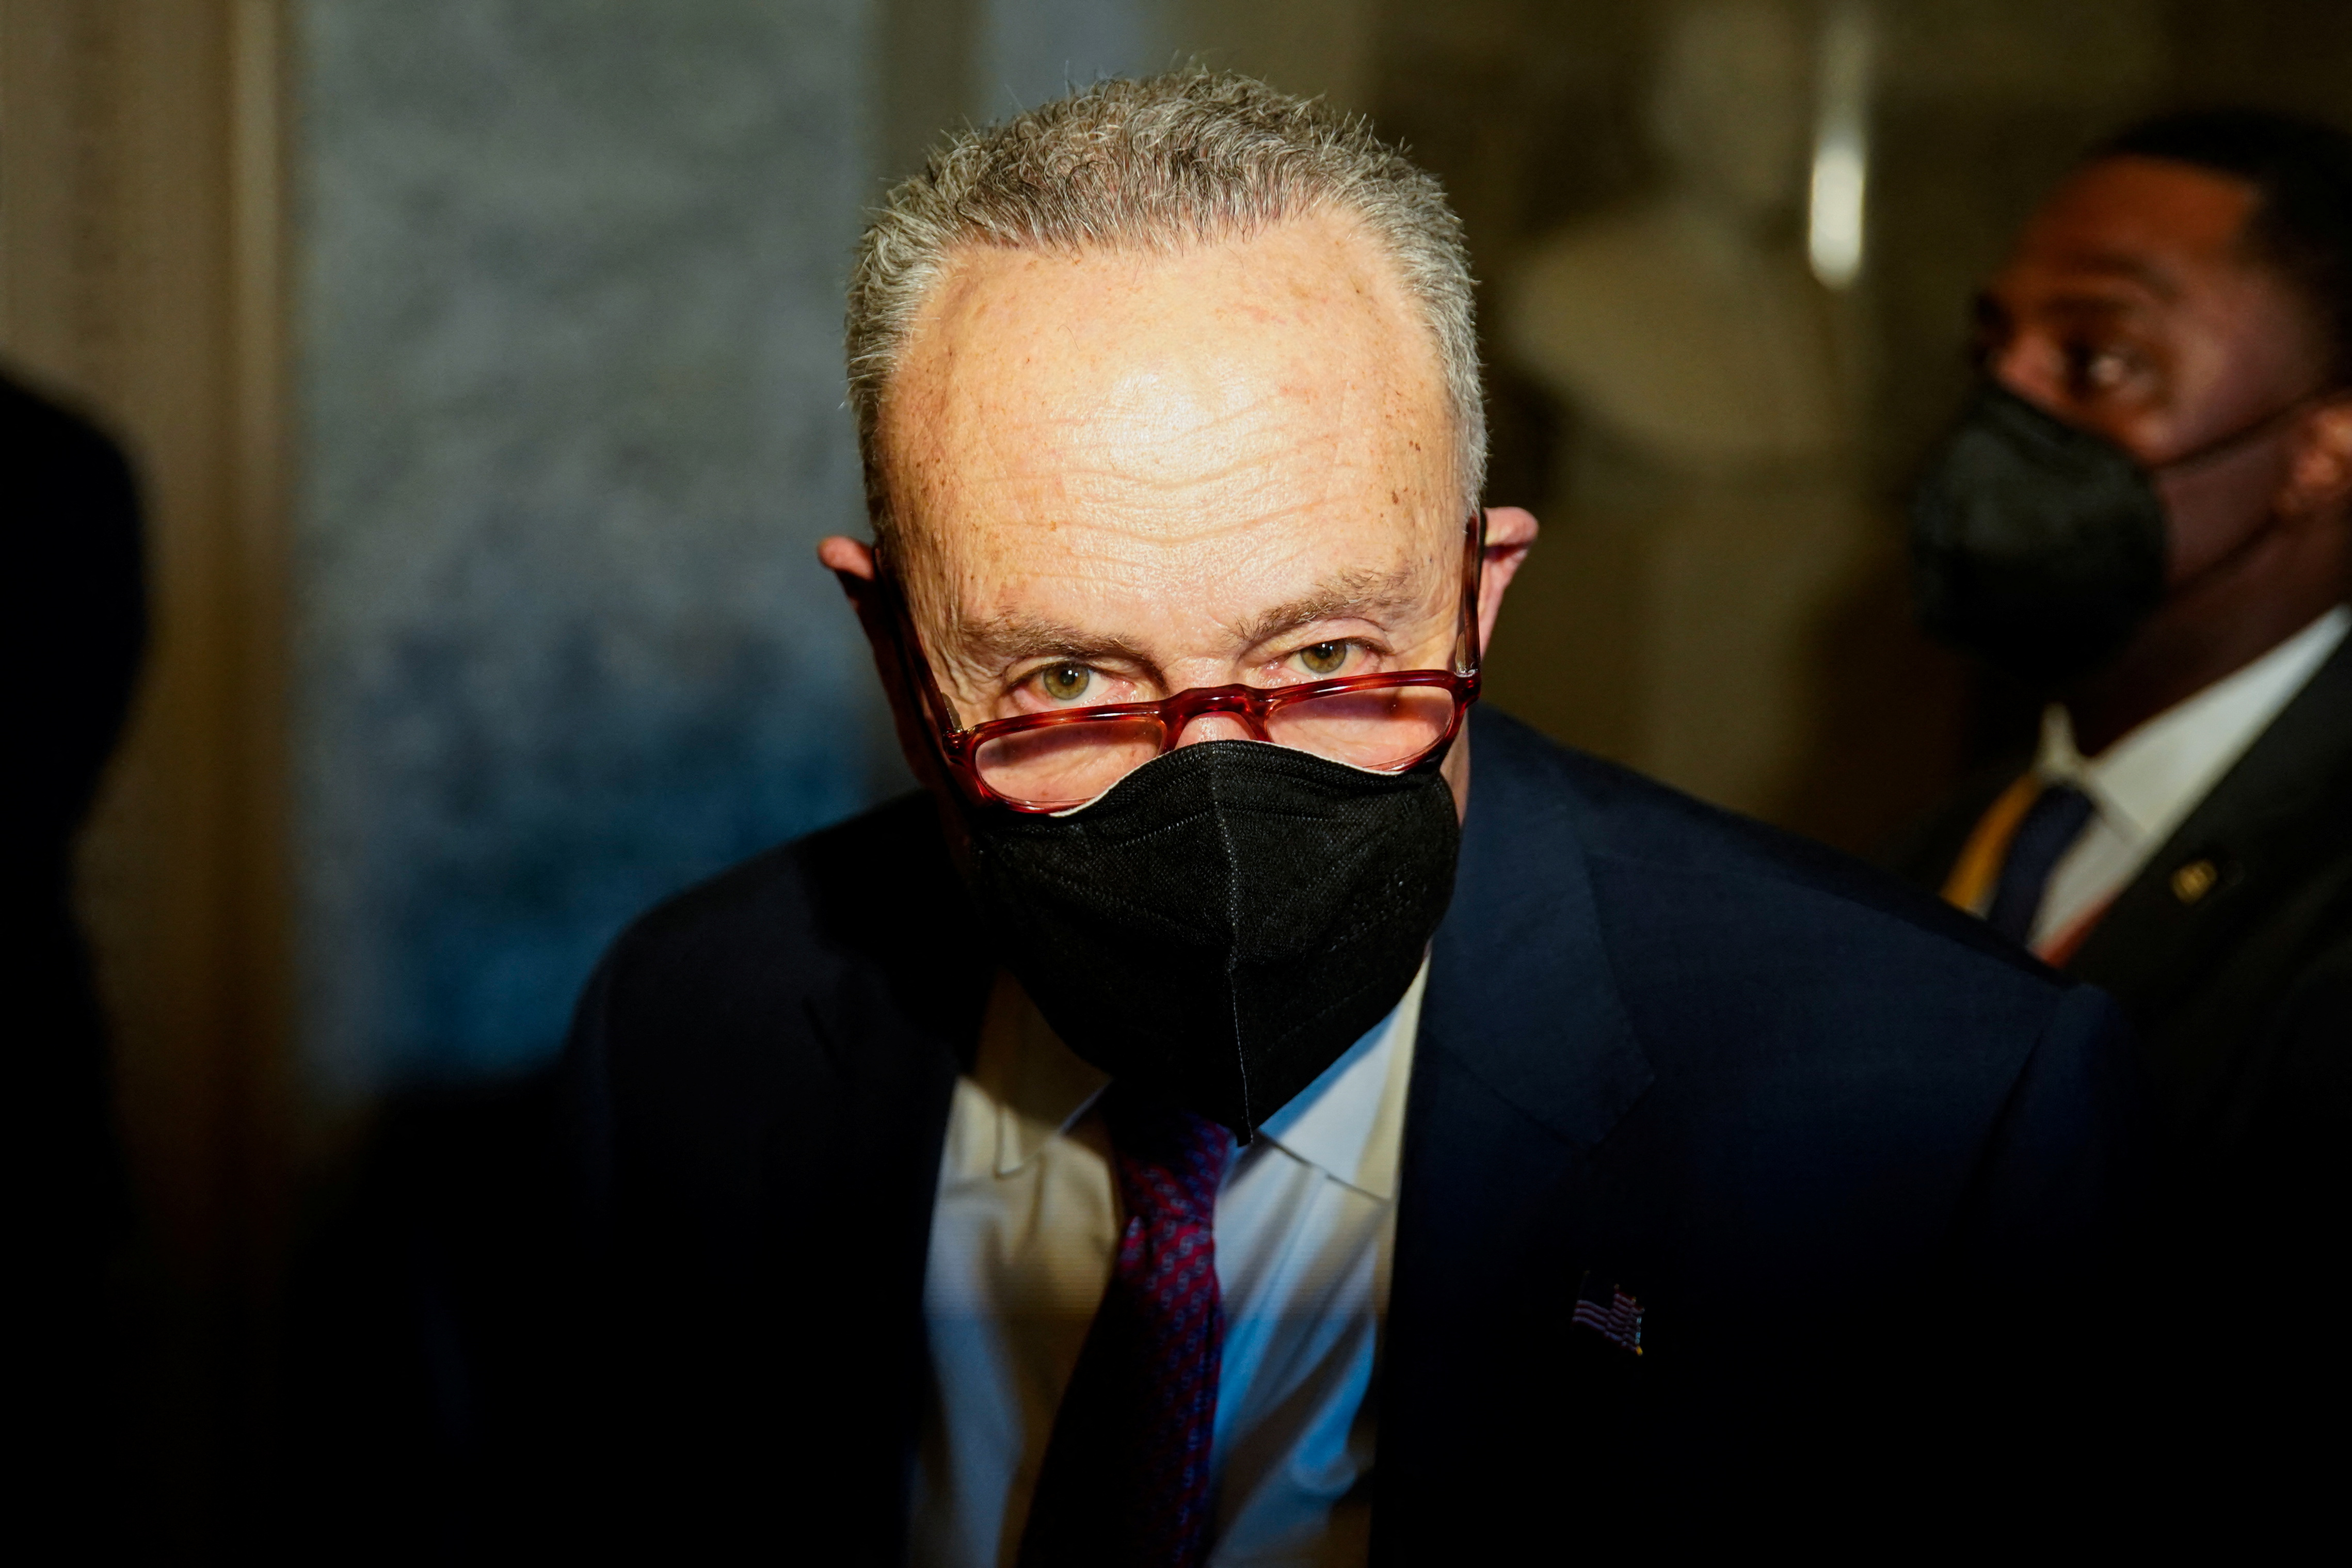 U.S. Senate Majority Leader Chuck Schumer (D-NY) speaks to reporters at the U.S. Capitol in Washington